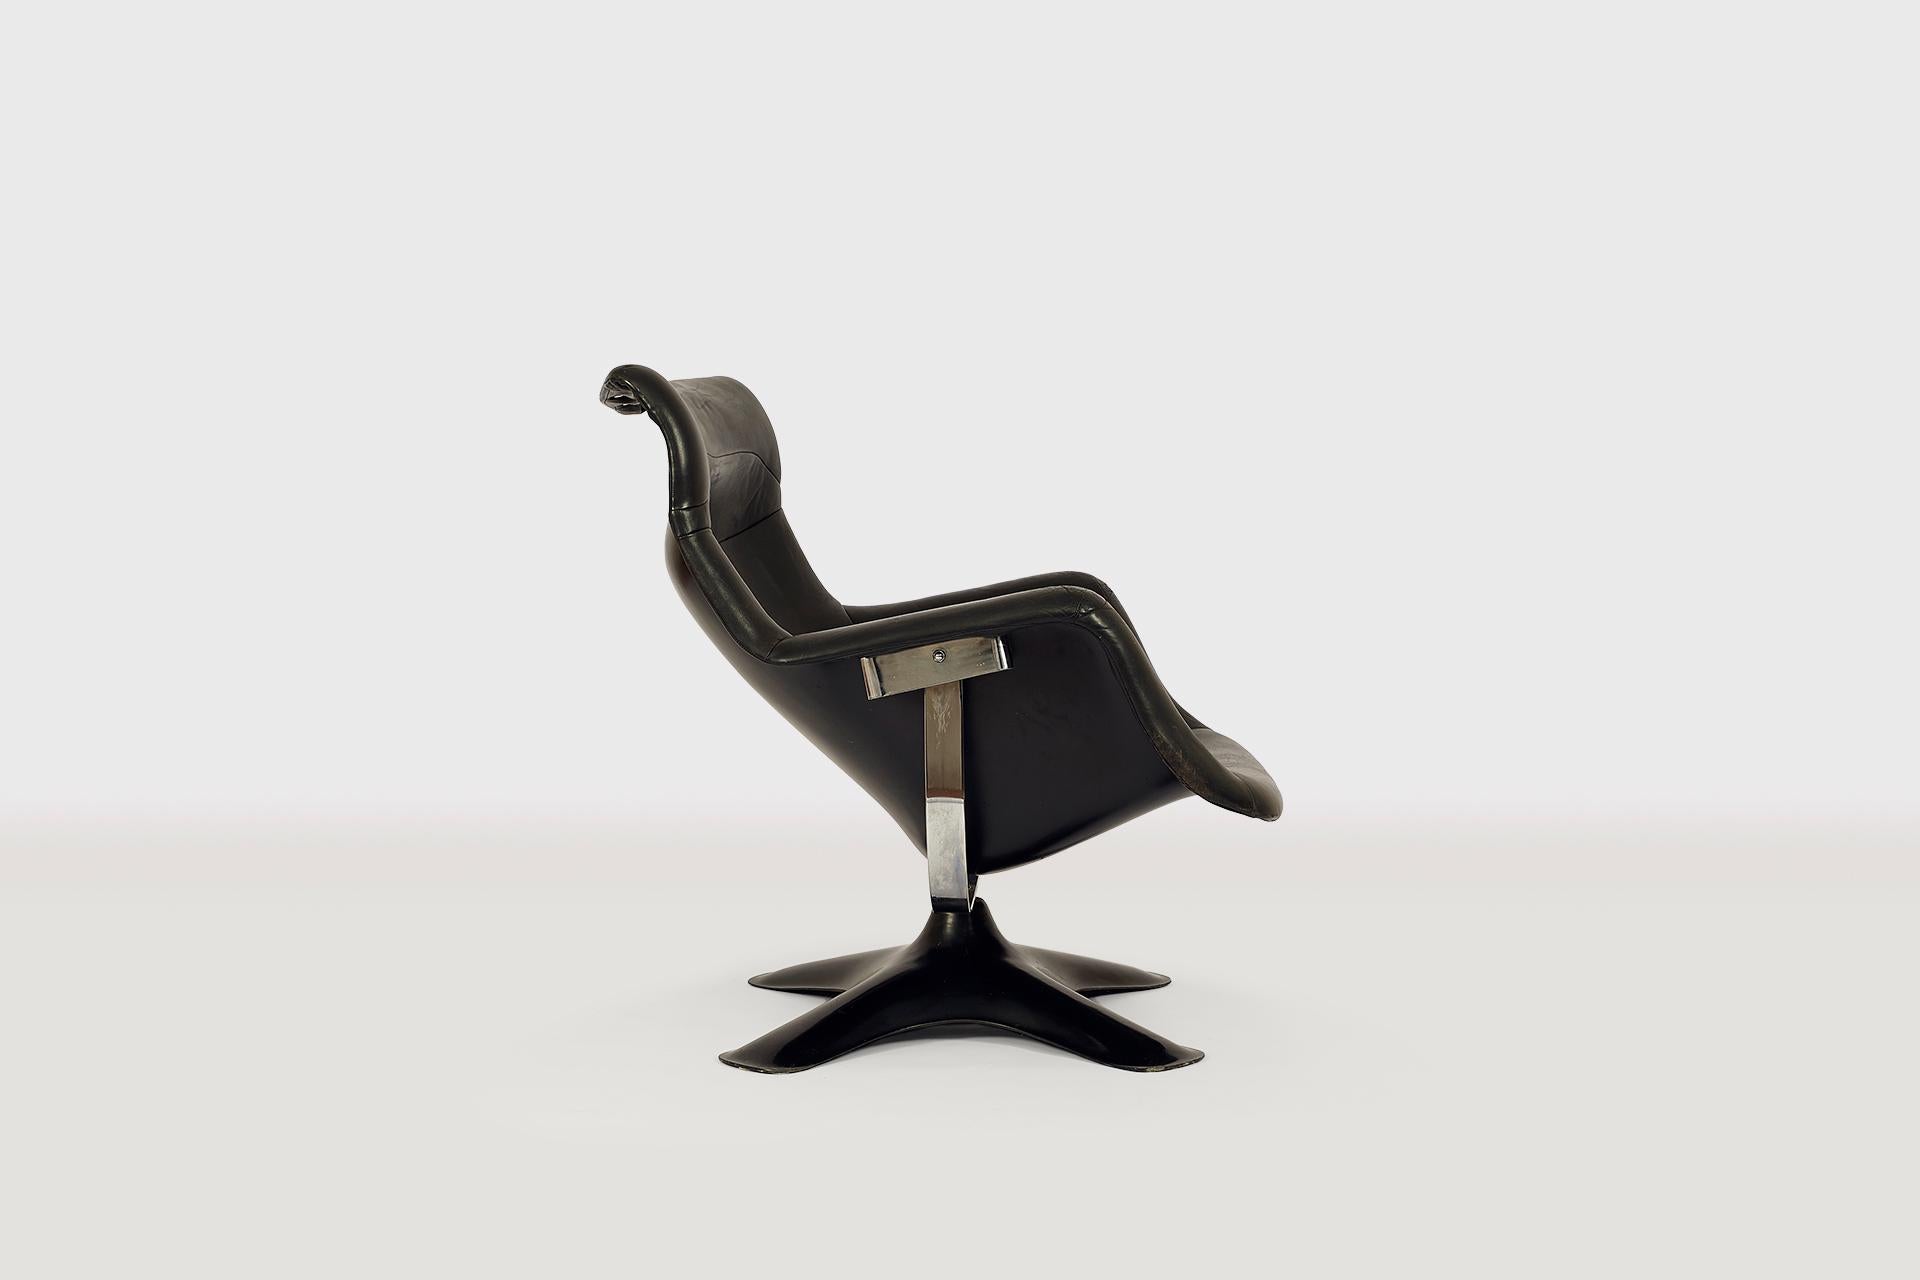 Very sought after Karuselli lounge chair seldom in black designed in 1965 by Yrjö Kukkapuro. The swivel and 